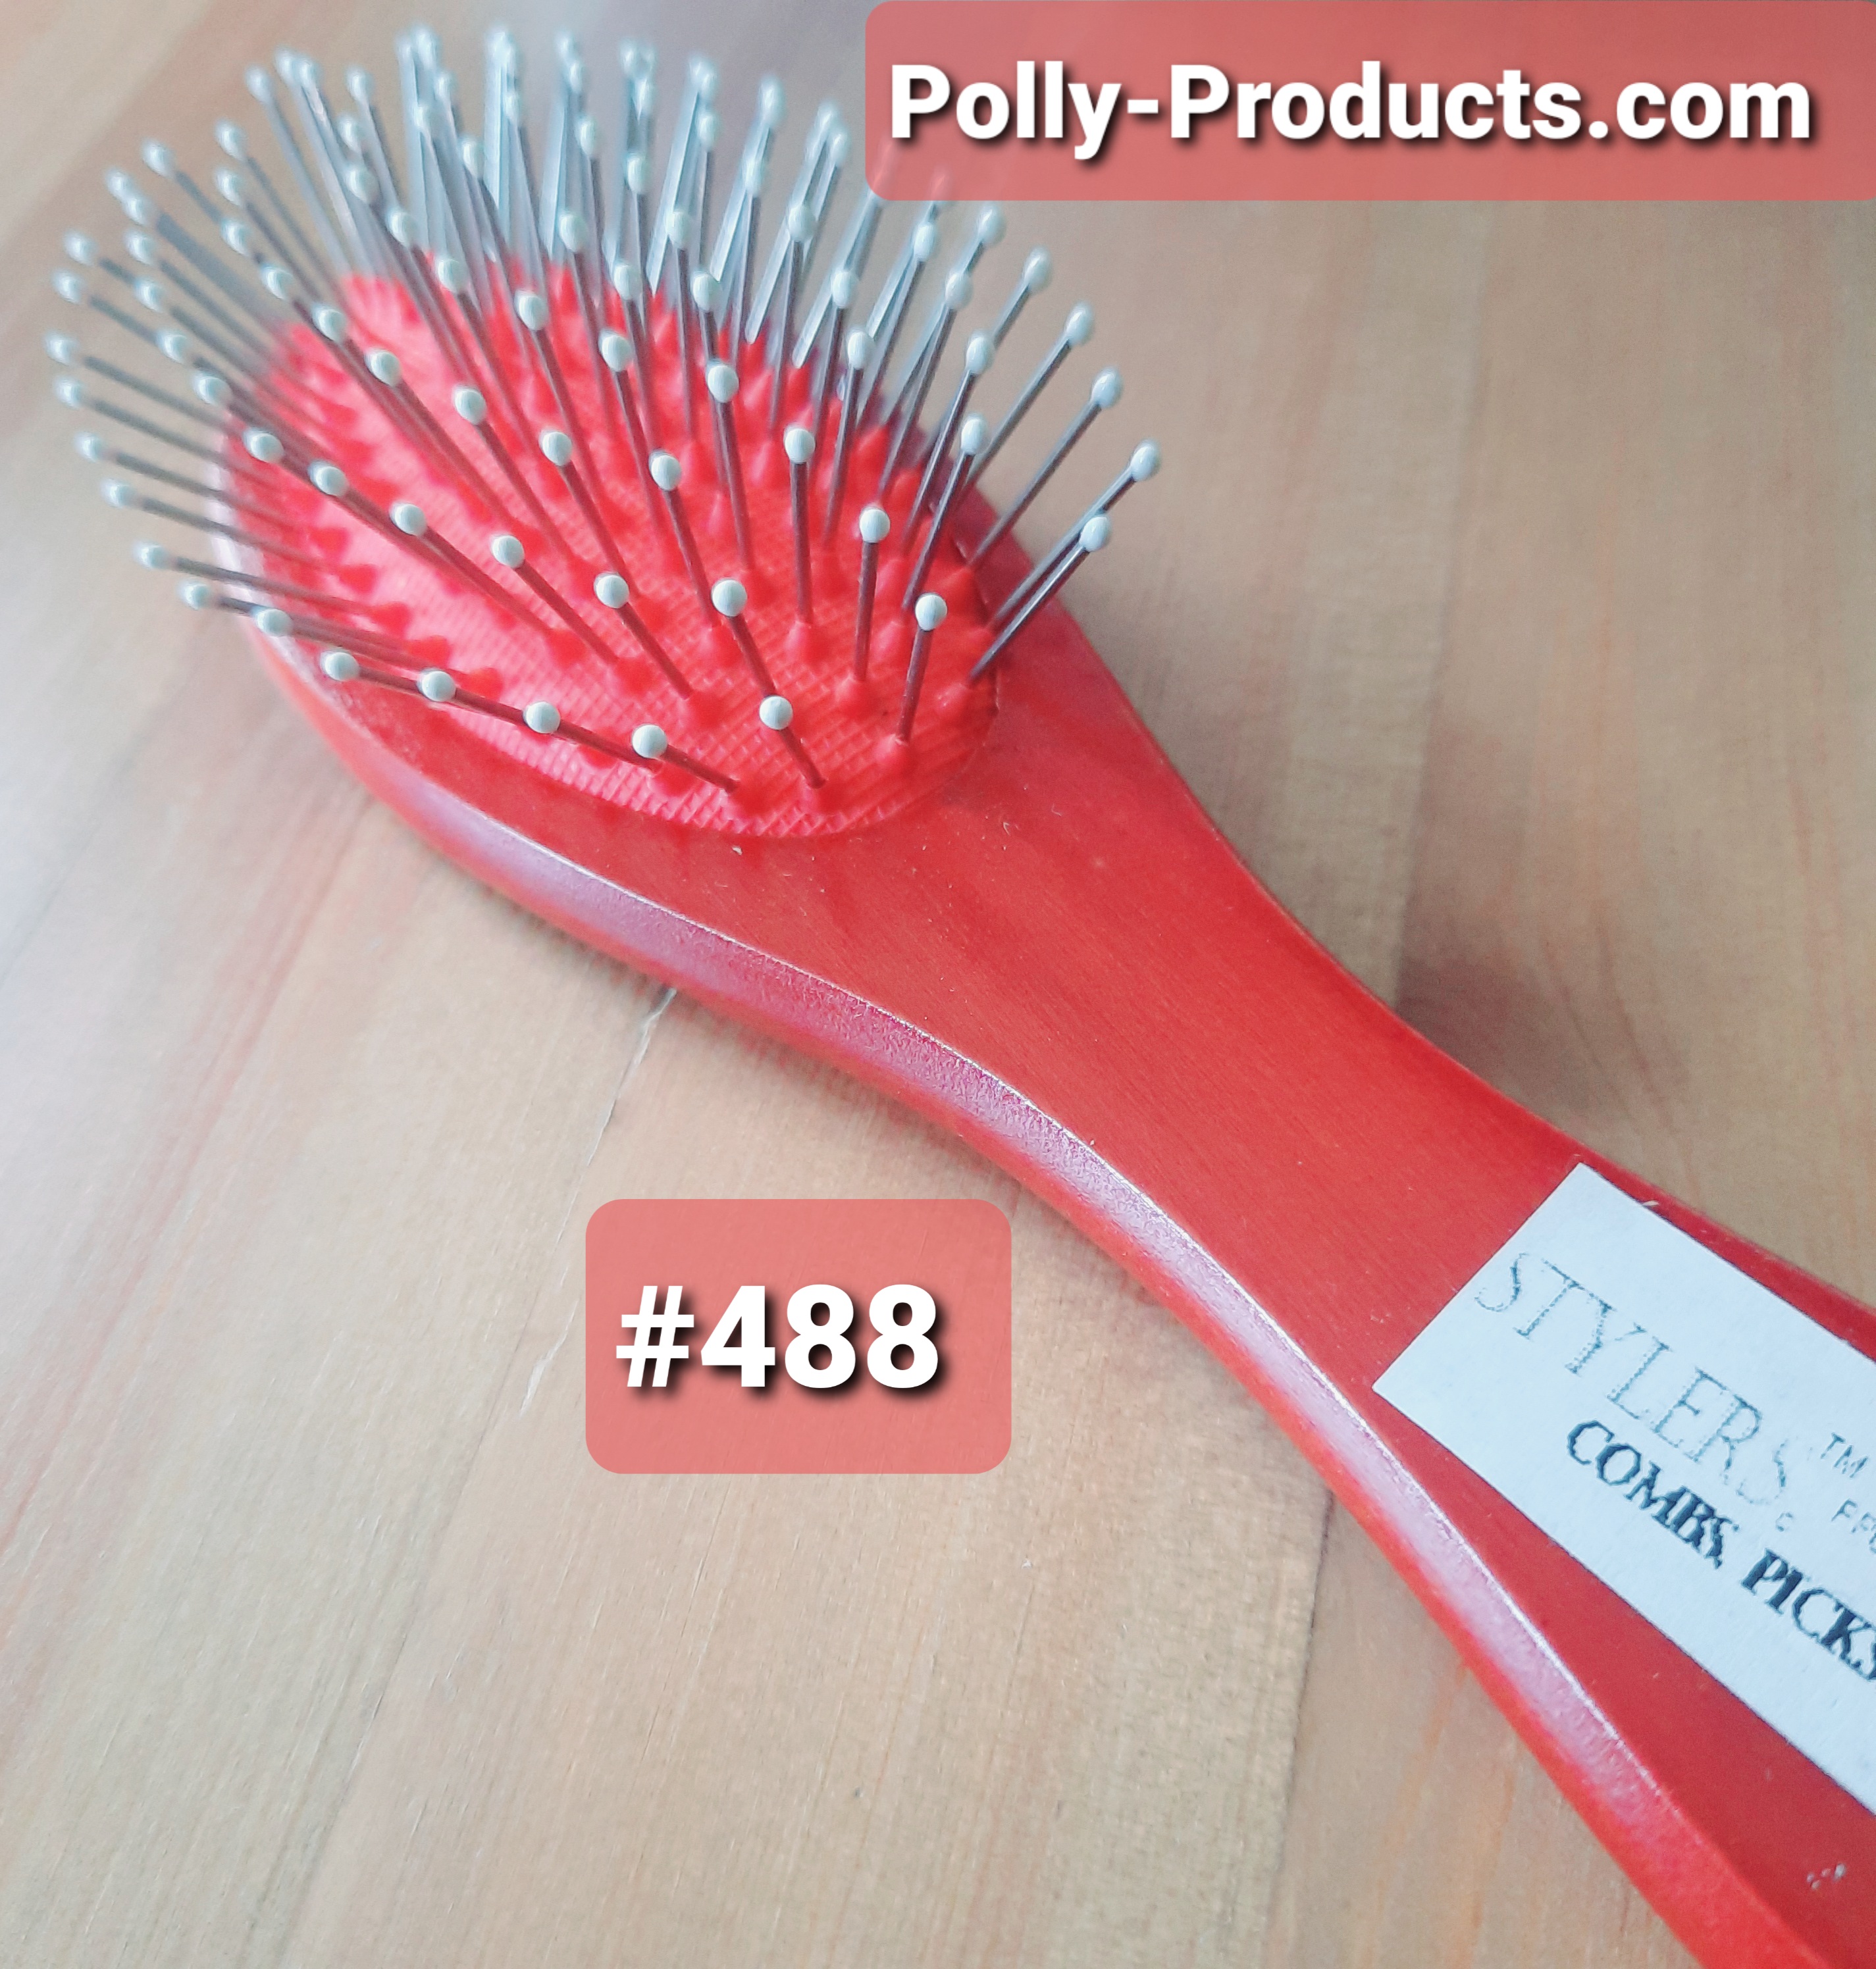 POLLY PRODUCTS #488 STYLERS CHERRY FINISH WOOD HANDLE WIRE WIG BRUSH WITH POLLY TIPS 